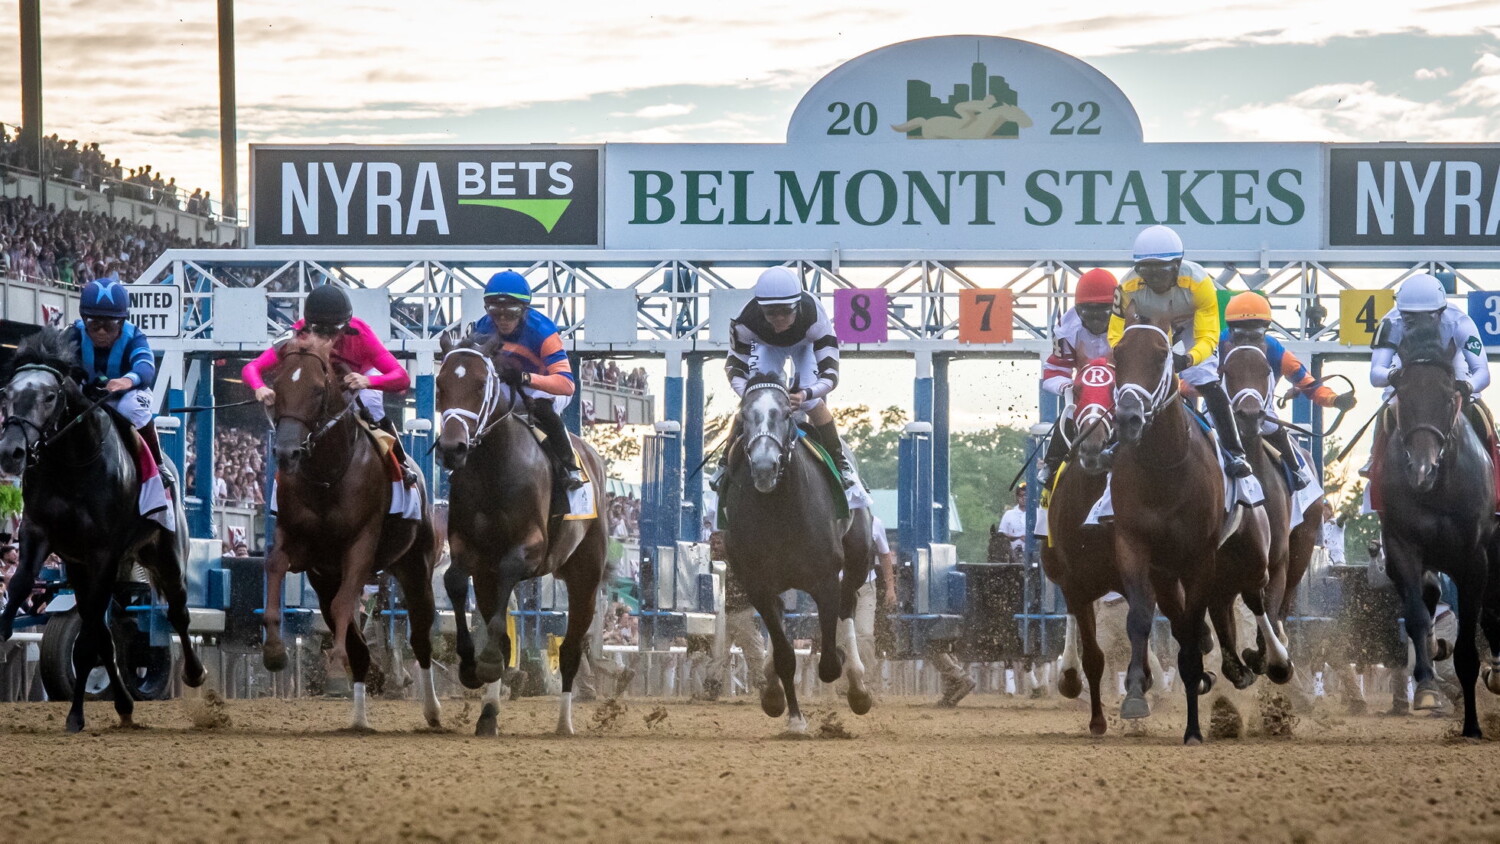 Belmont Stakes Bitcoin Betting